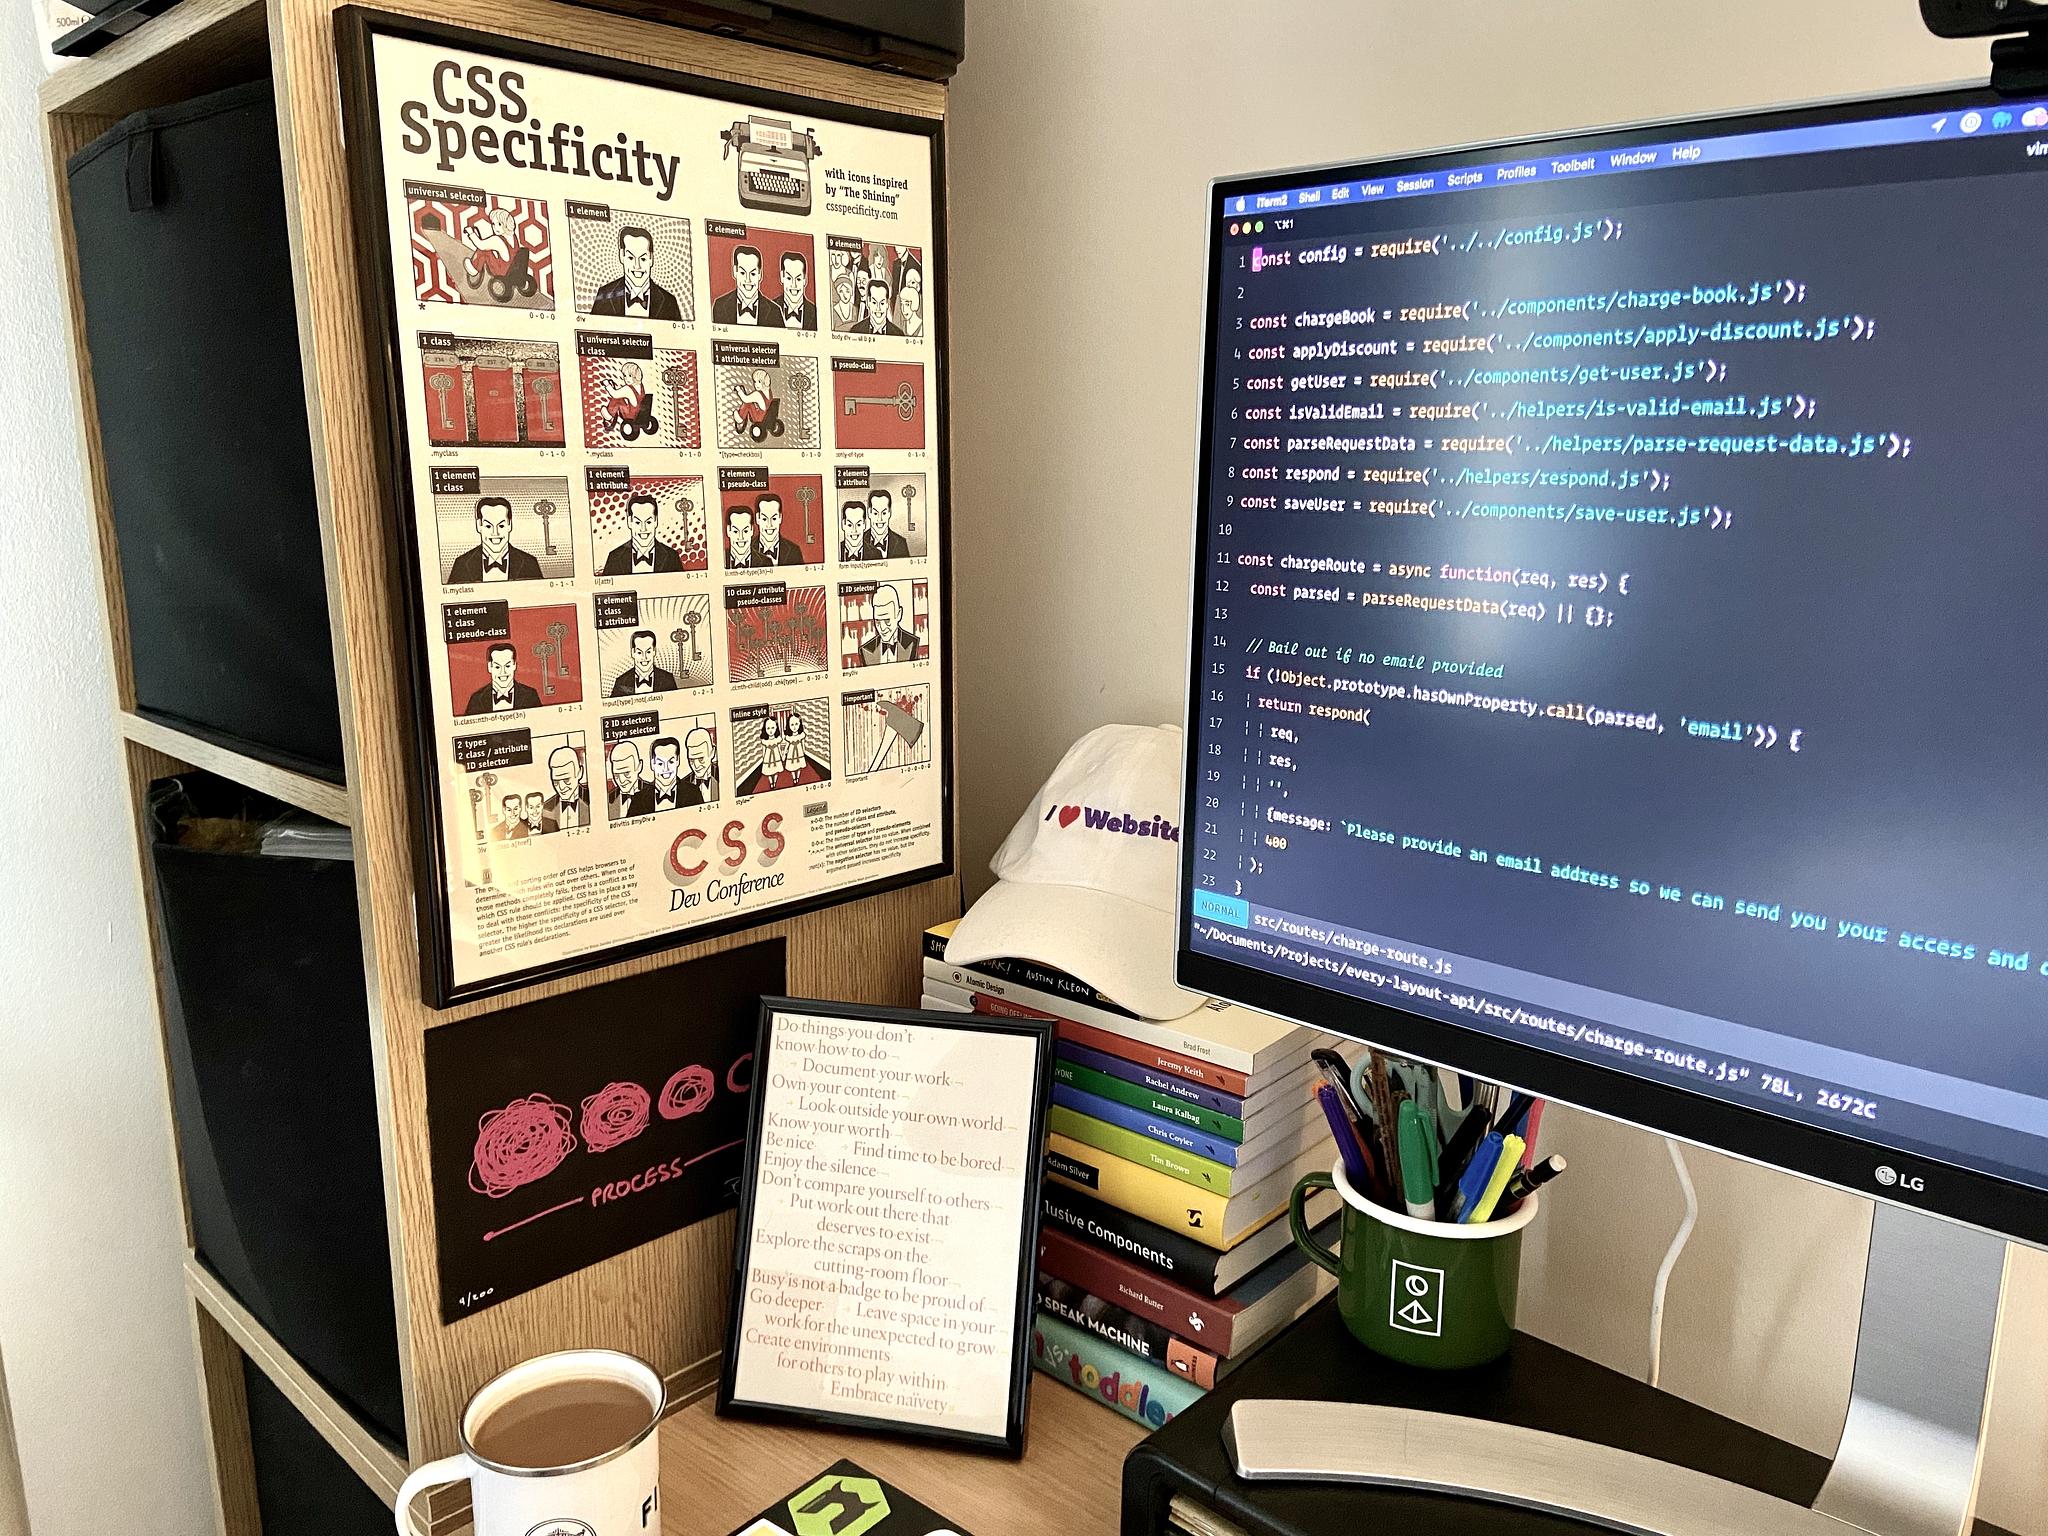 The Shining CSS Specificity poster framed on a wall by a monitor